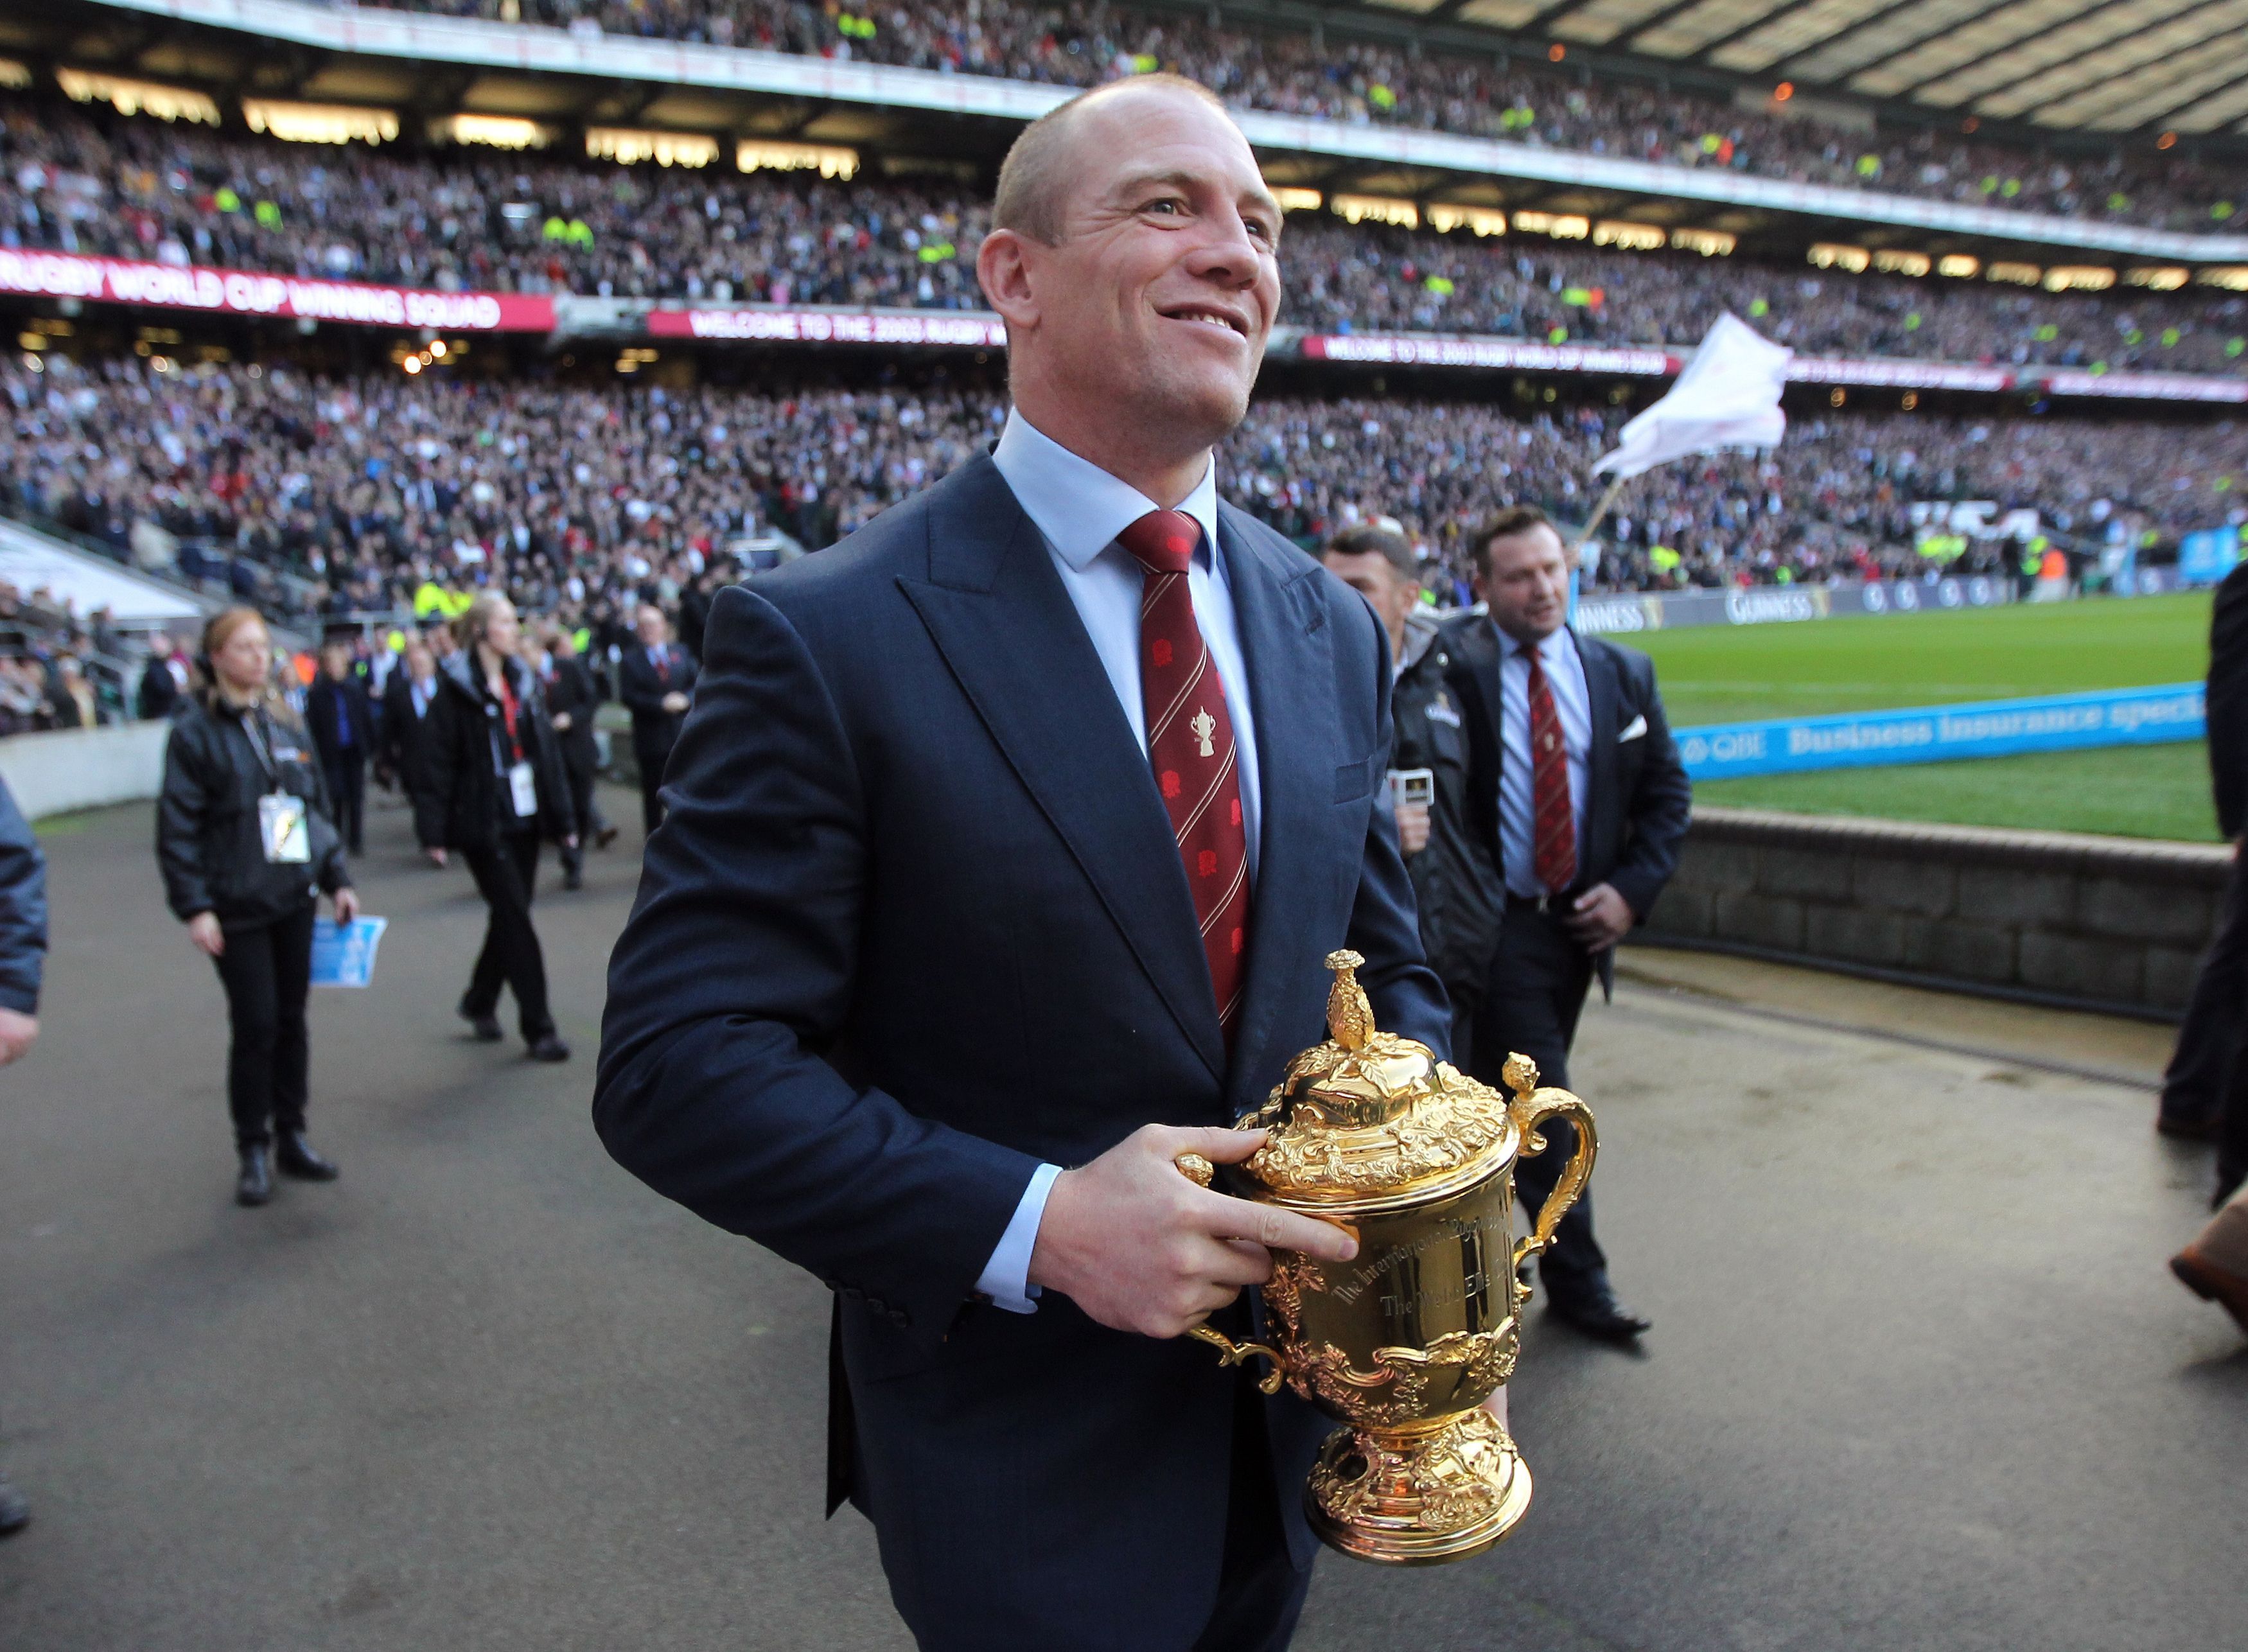 Mike Tindall won the 2003 World Cup with England